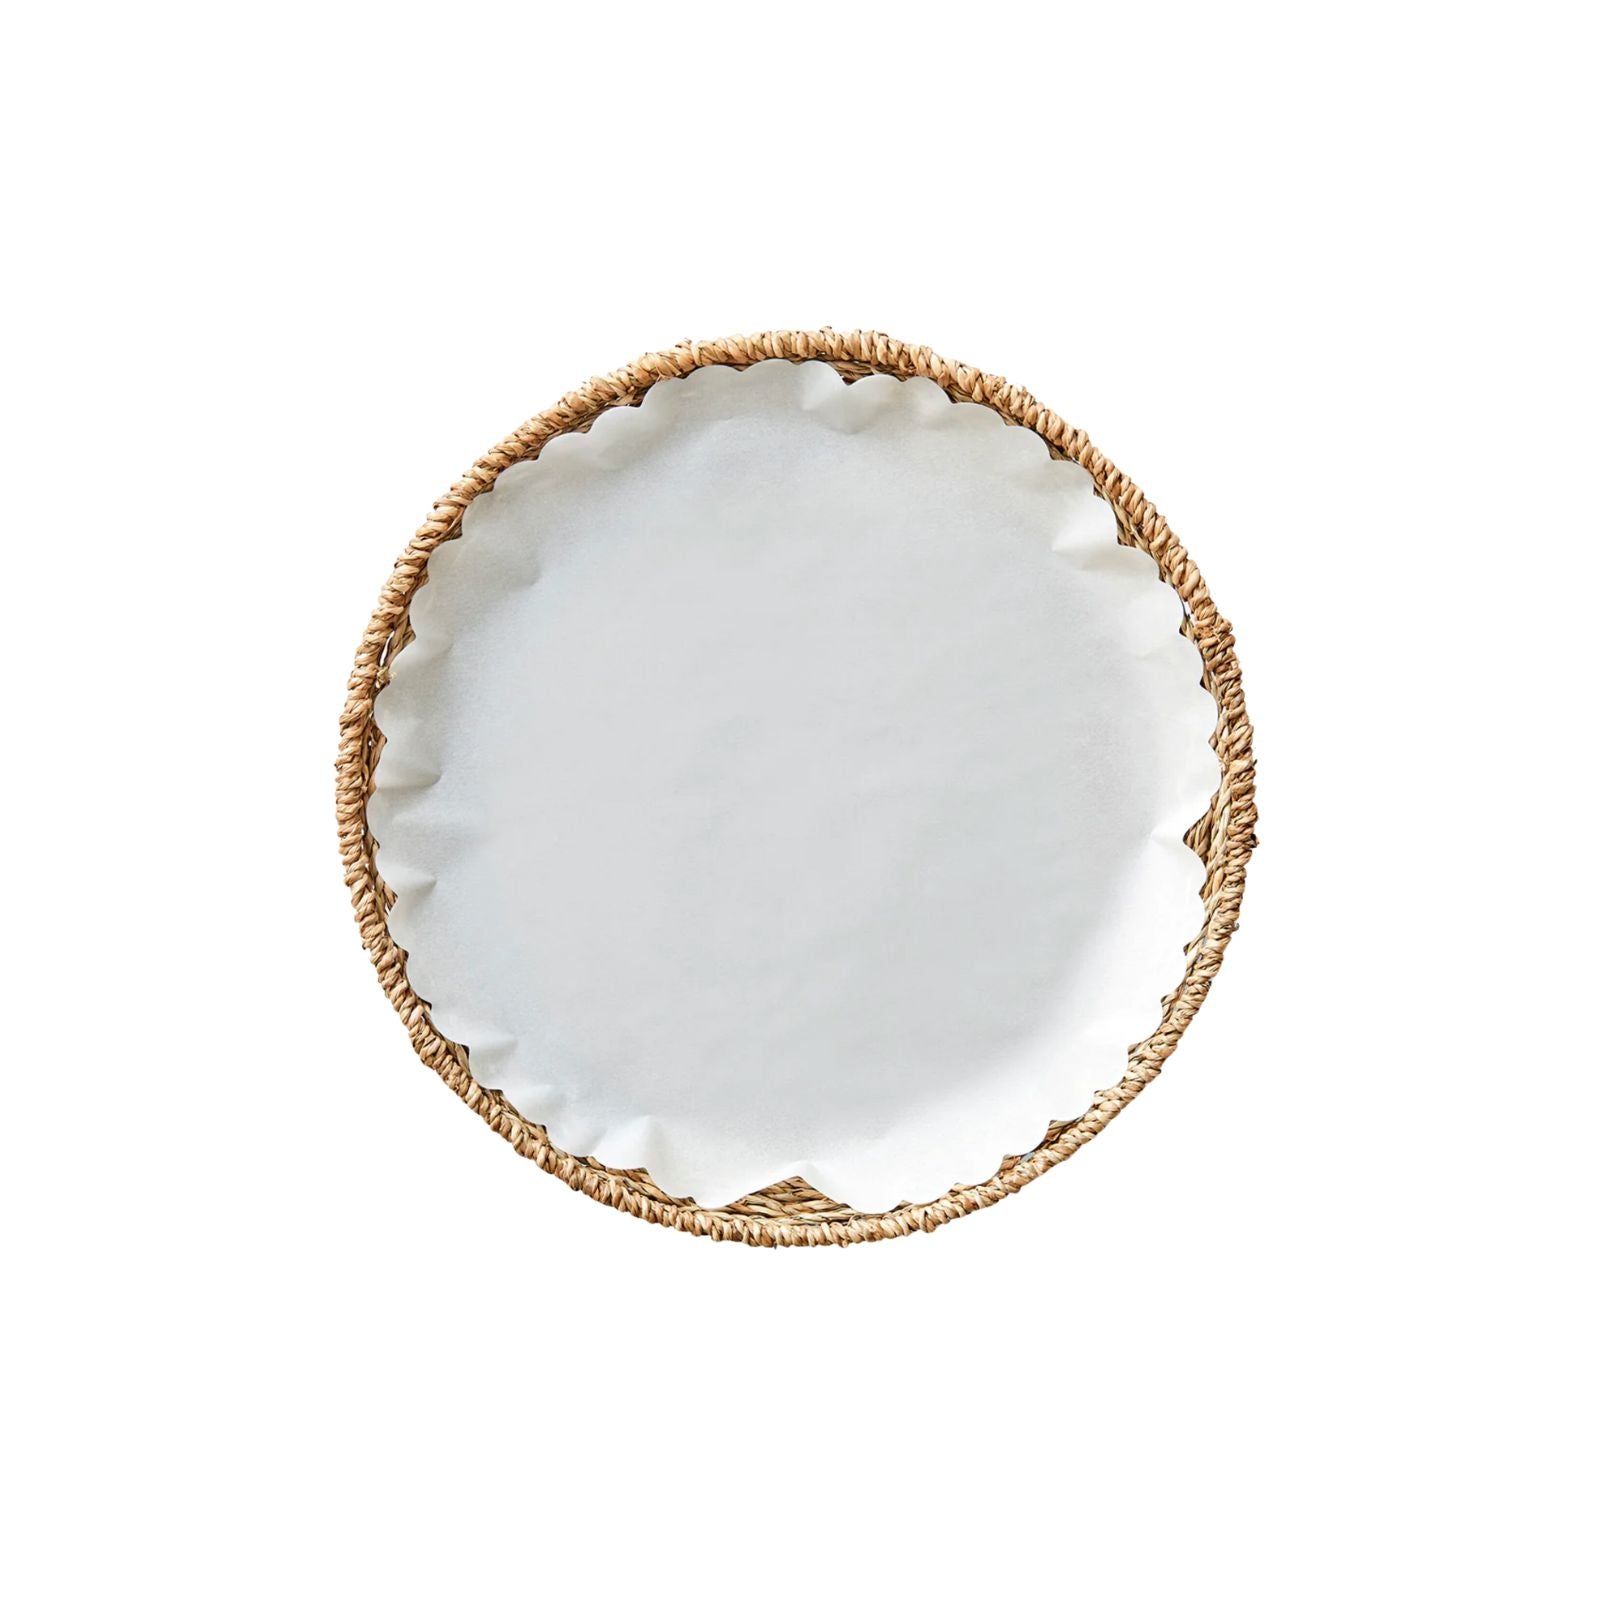 Seagrass Plate Set of 4